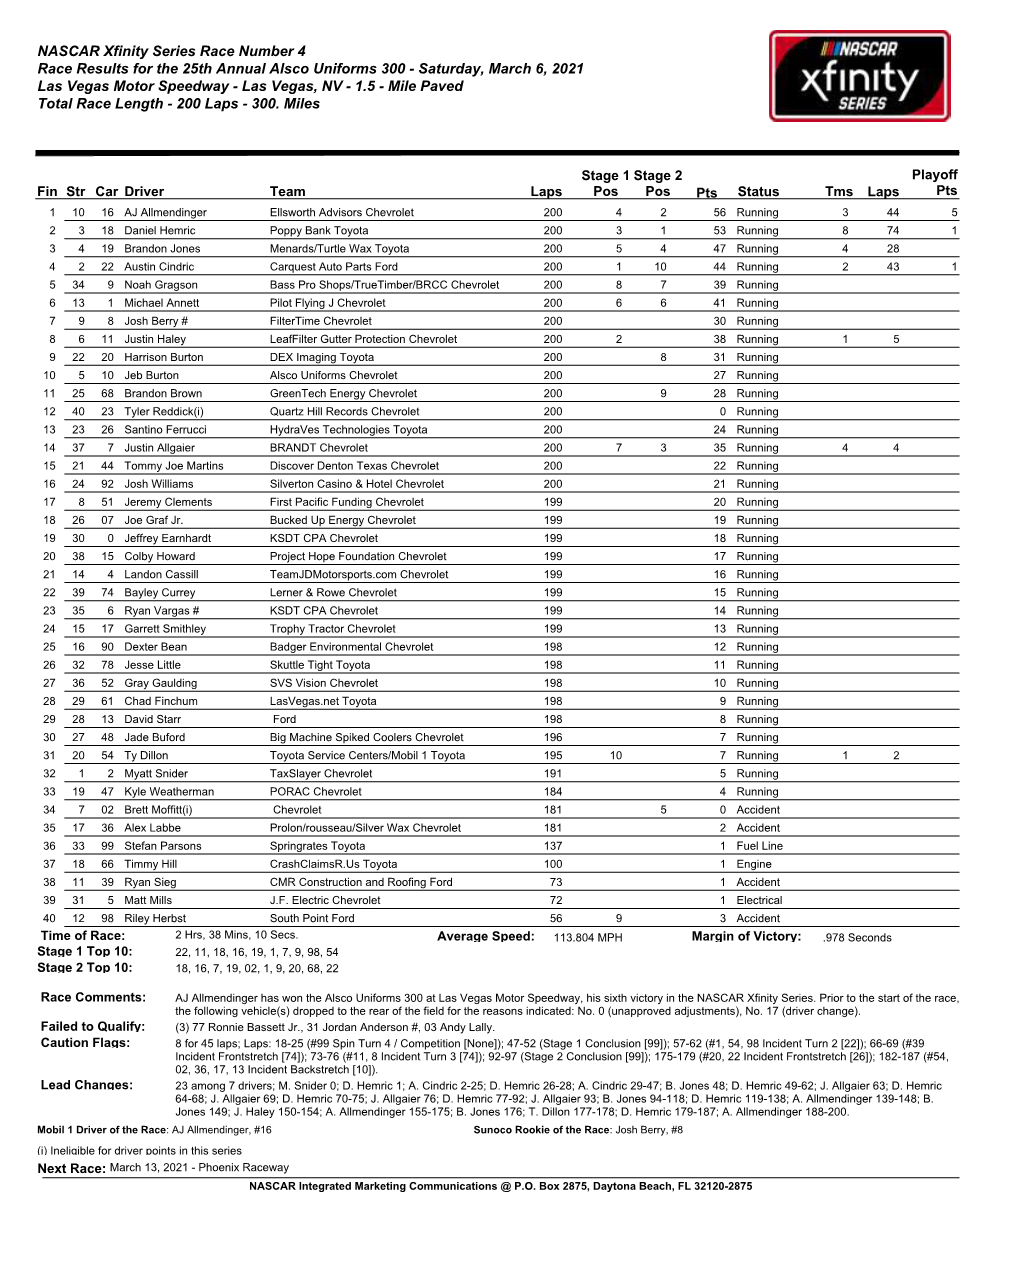 NASCAR Xfinity Series Race Number 4 Race Results for the 25Th Annual